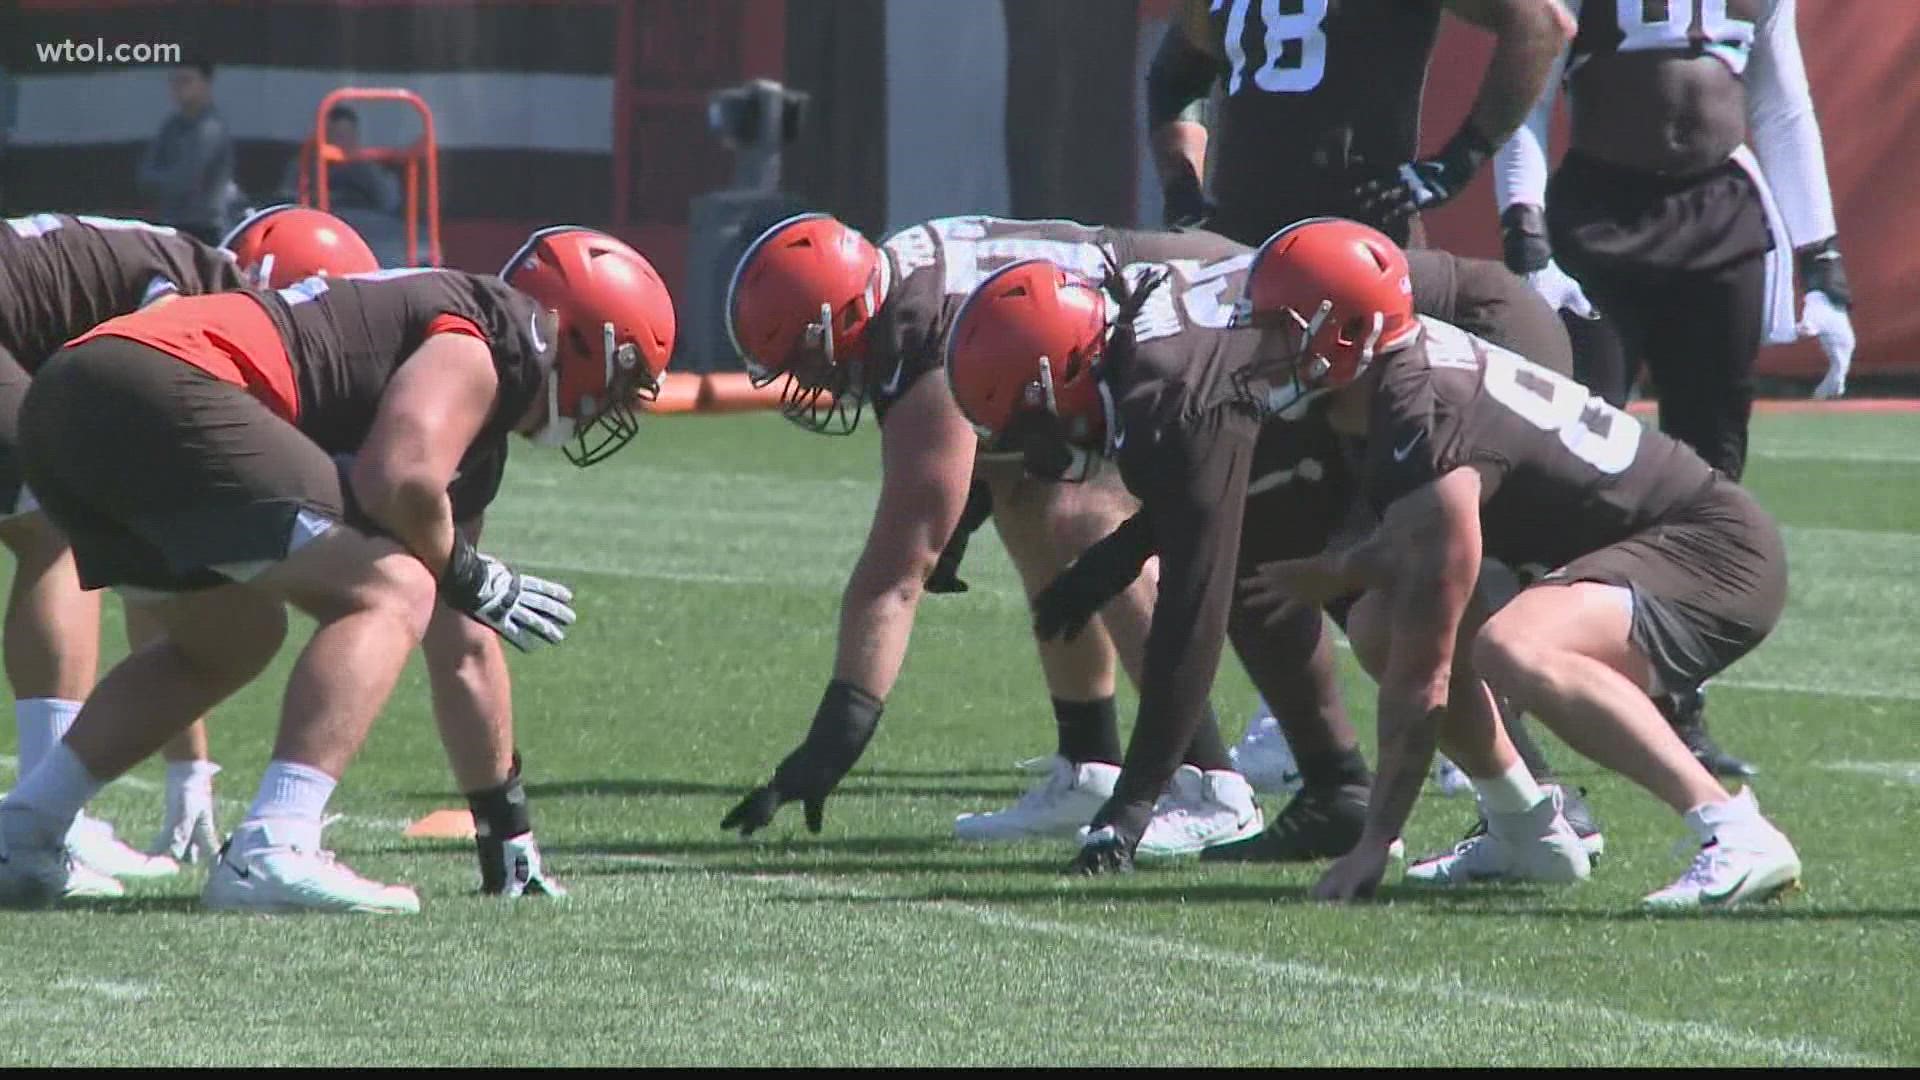 James Hudson has been practicing at left tackle for Cleveland ahead of Sunday's matchup with the Texans.